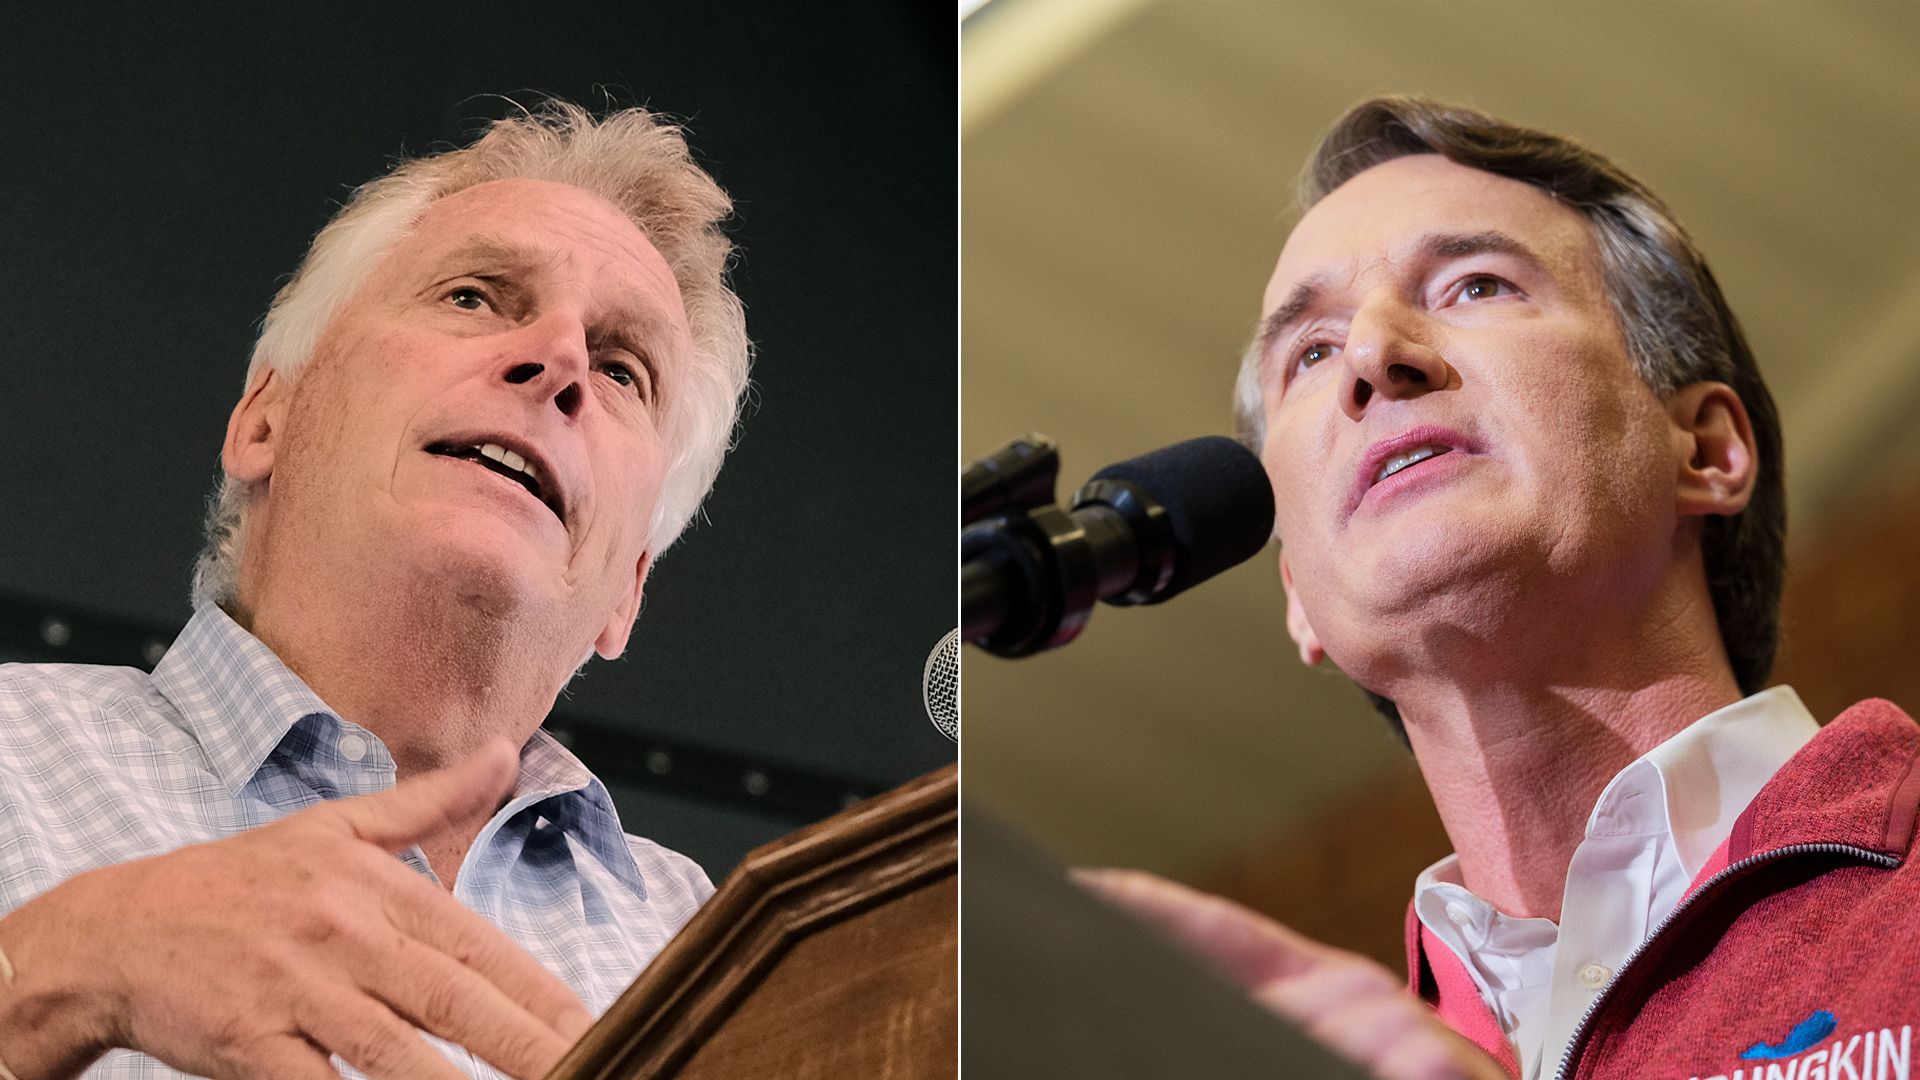 Side-by-side: Terry McAuliffe and Glenn Youngkin